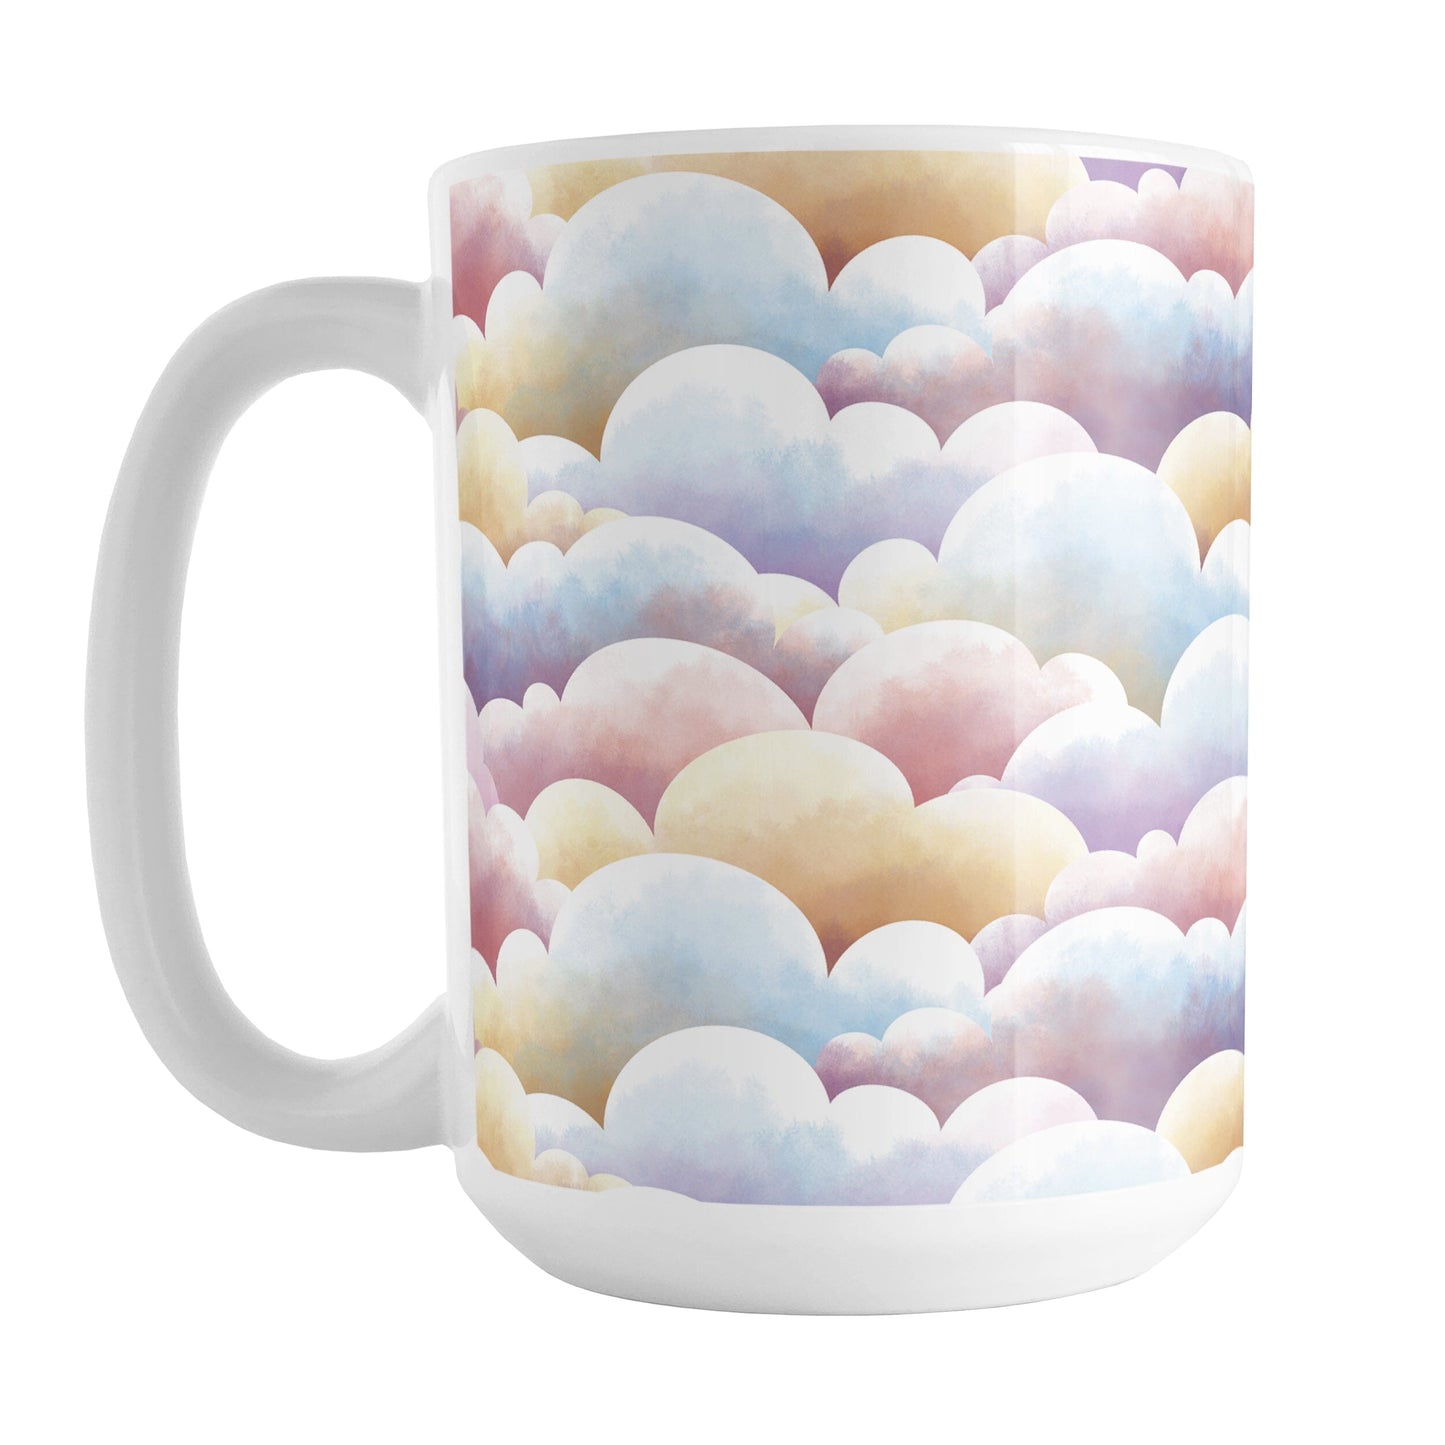 Colorful Clouds Mug (15oz) at Amy's Coffee Mugs. A ceramic coffee mug designed with whimsical and colorful clouds in a pattern that wraps around the mug to the handle.